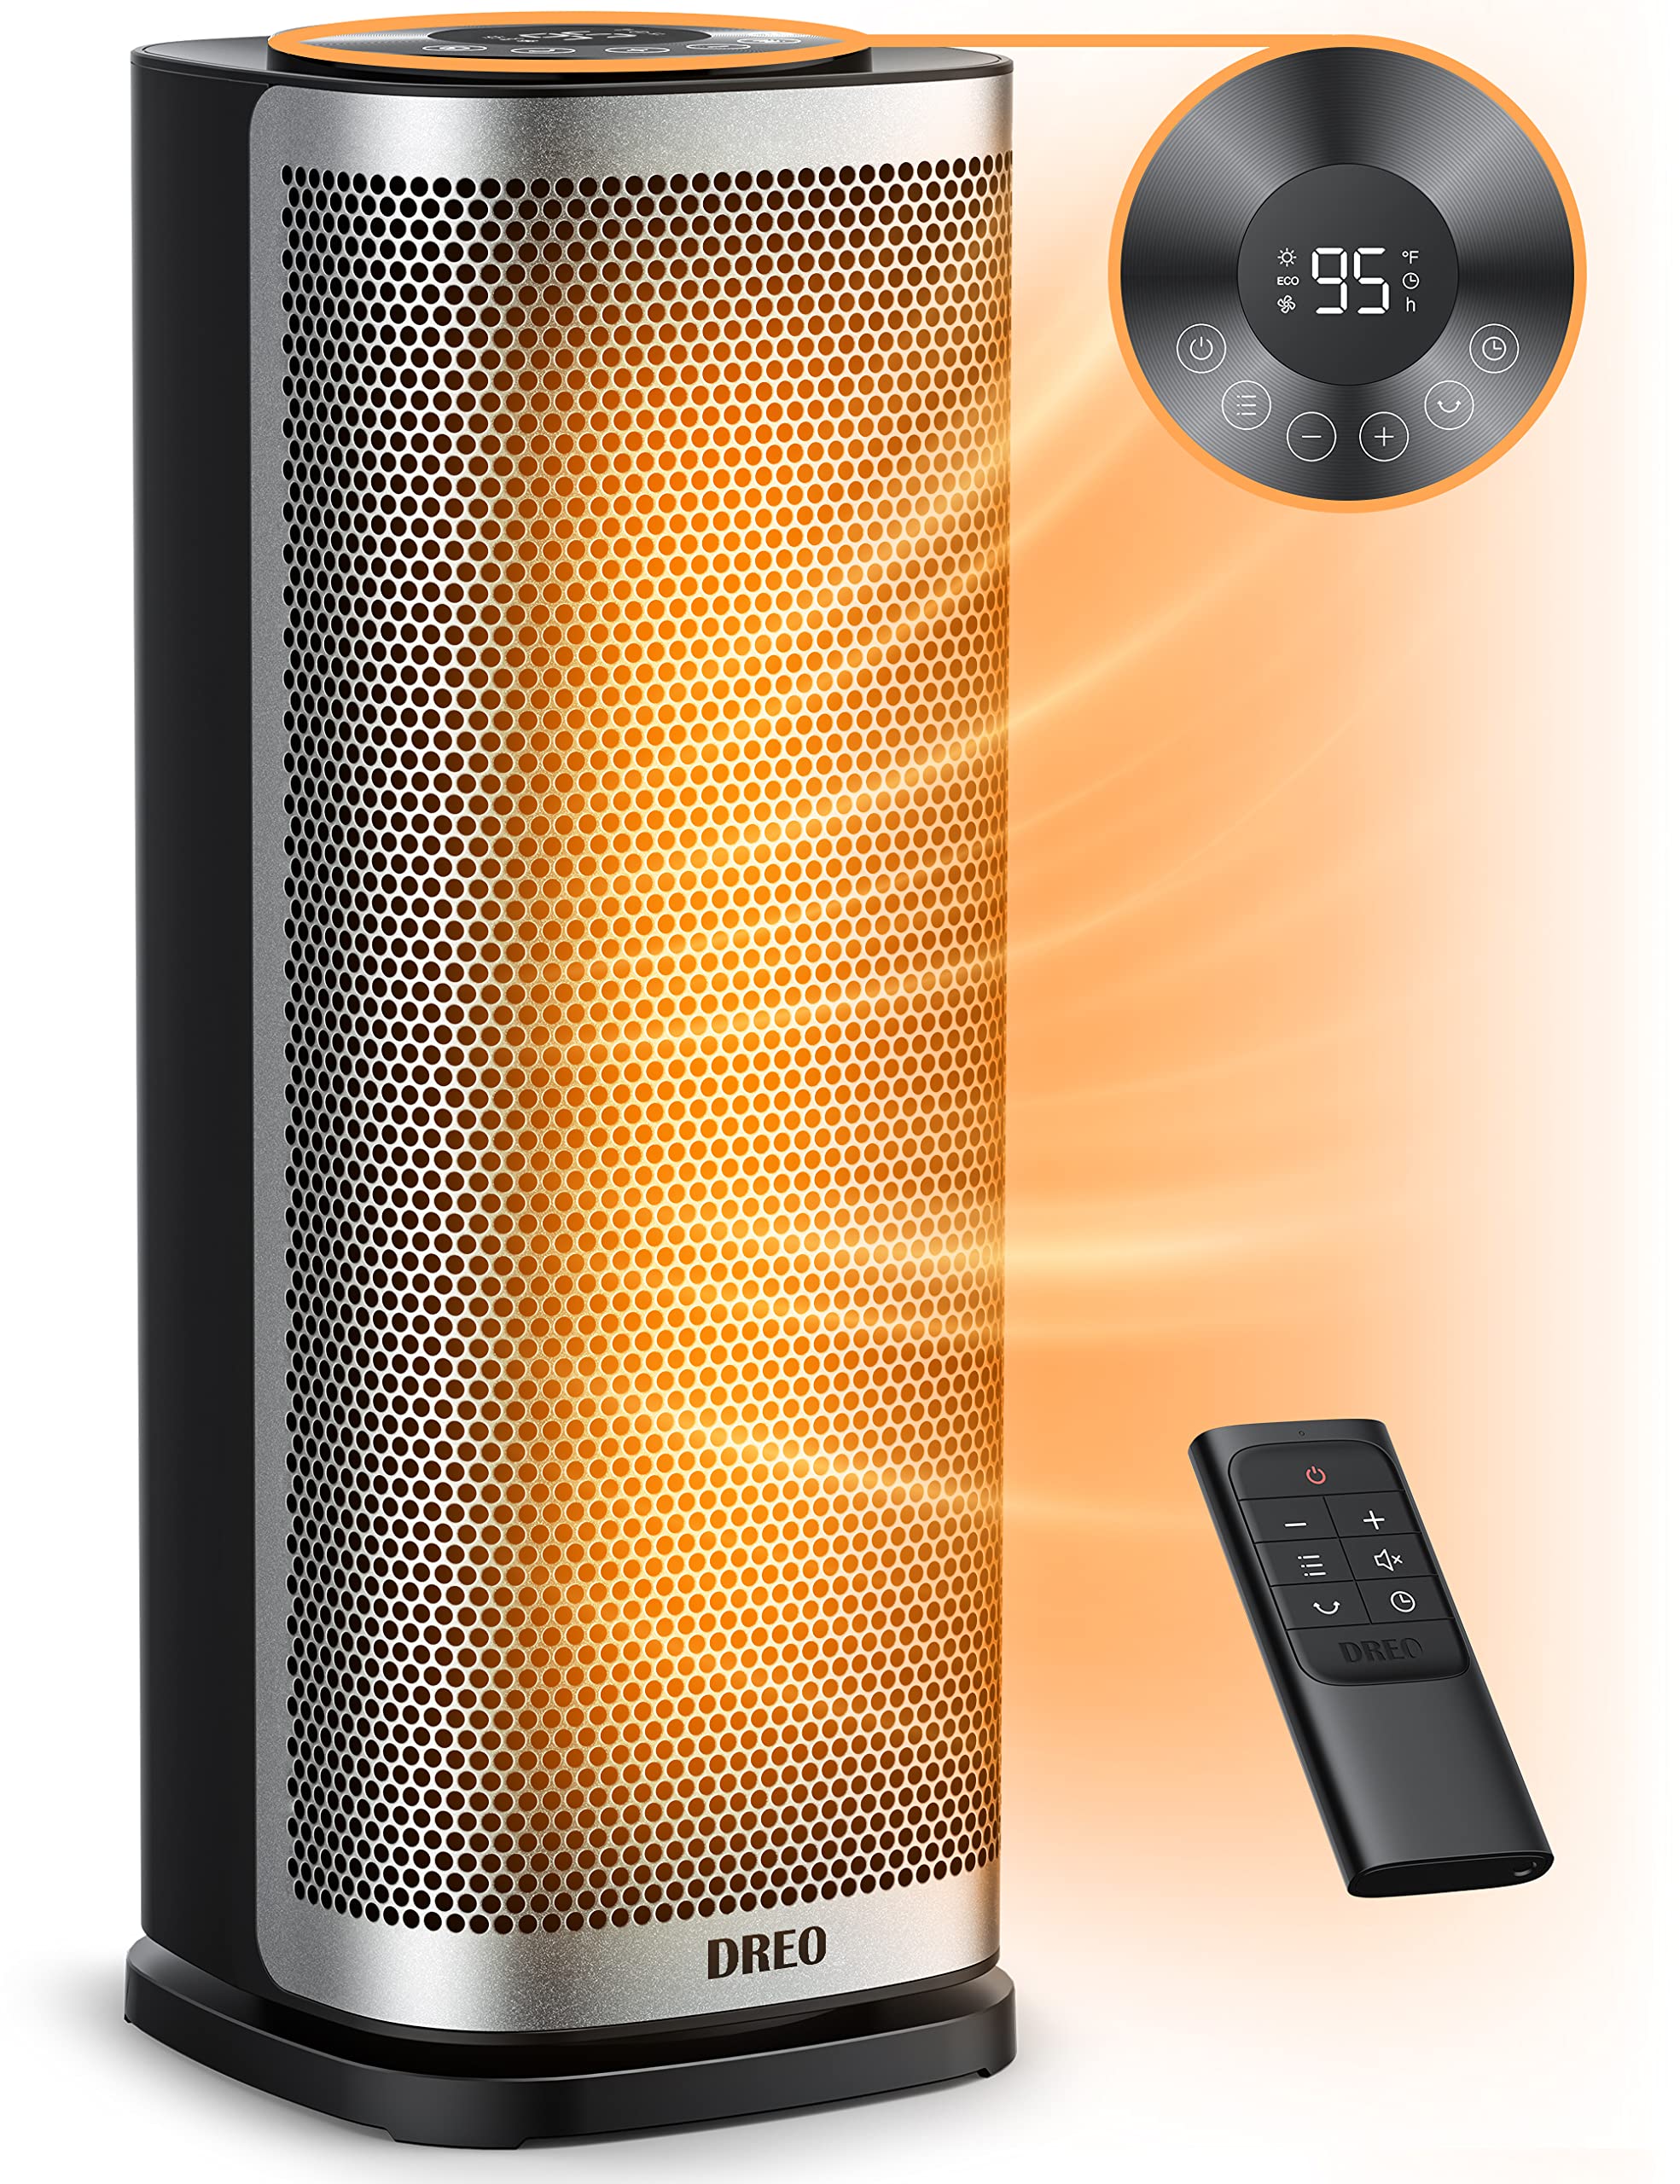 Dreo Space Heaters for Indoor Use, 1500W Fast Heating Ceramic Electric & Portable Heaters with Thermostat, 70° Oscillating with Tip-over & Overheat Protection, Remote, 12H Timer, for Office Bedroom